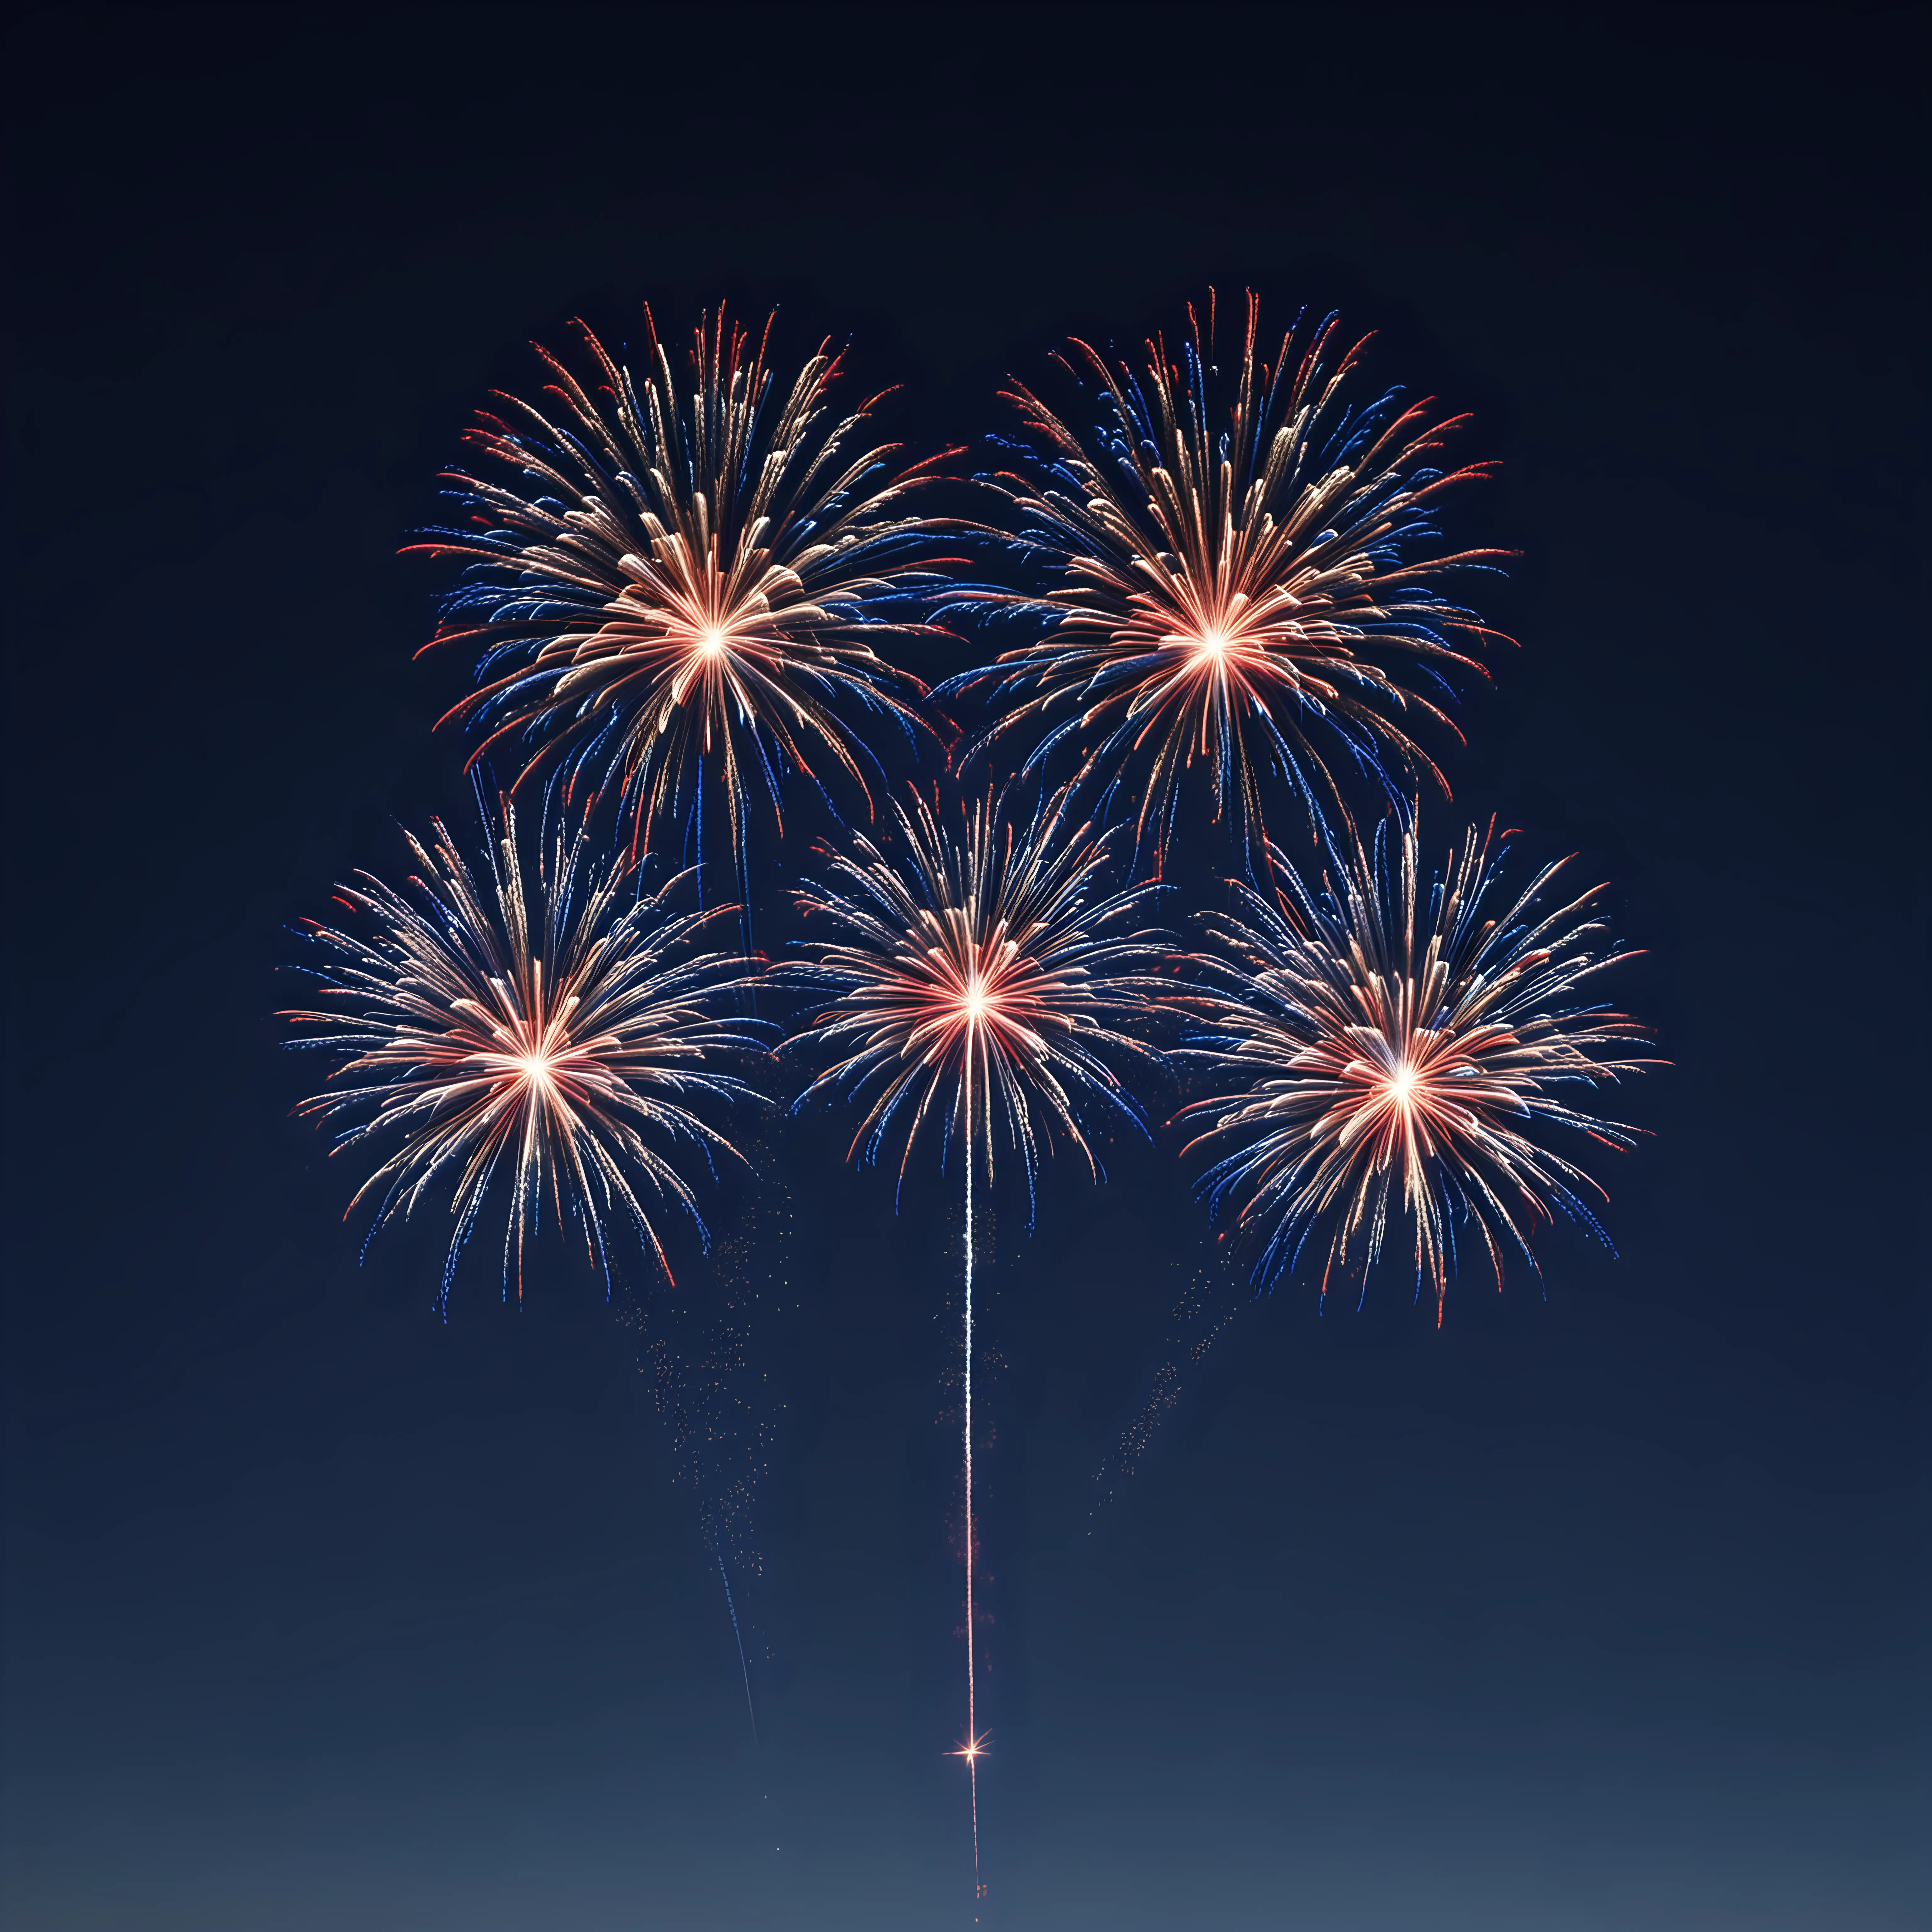 three very very small glowing red white and blue firework on a natural darkish bold blue sky background with dimension to it and with no ground